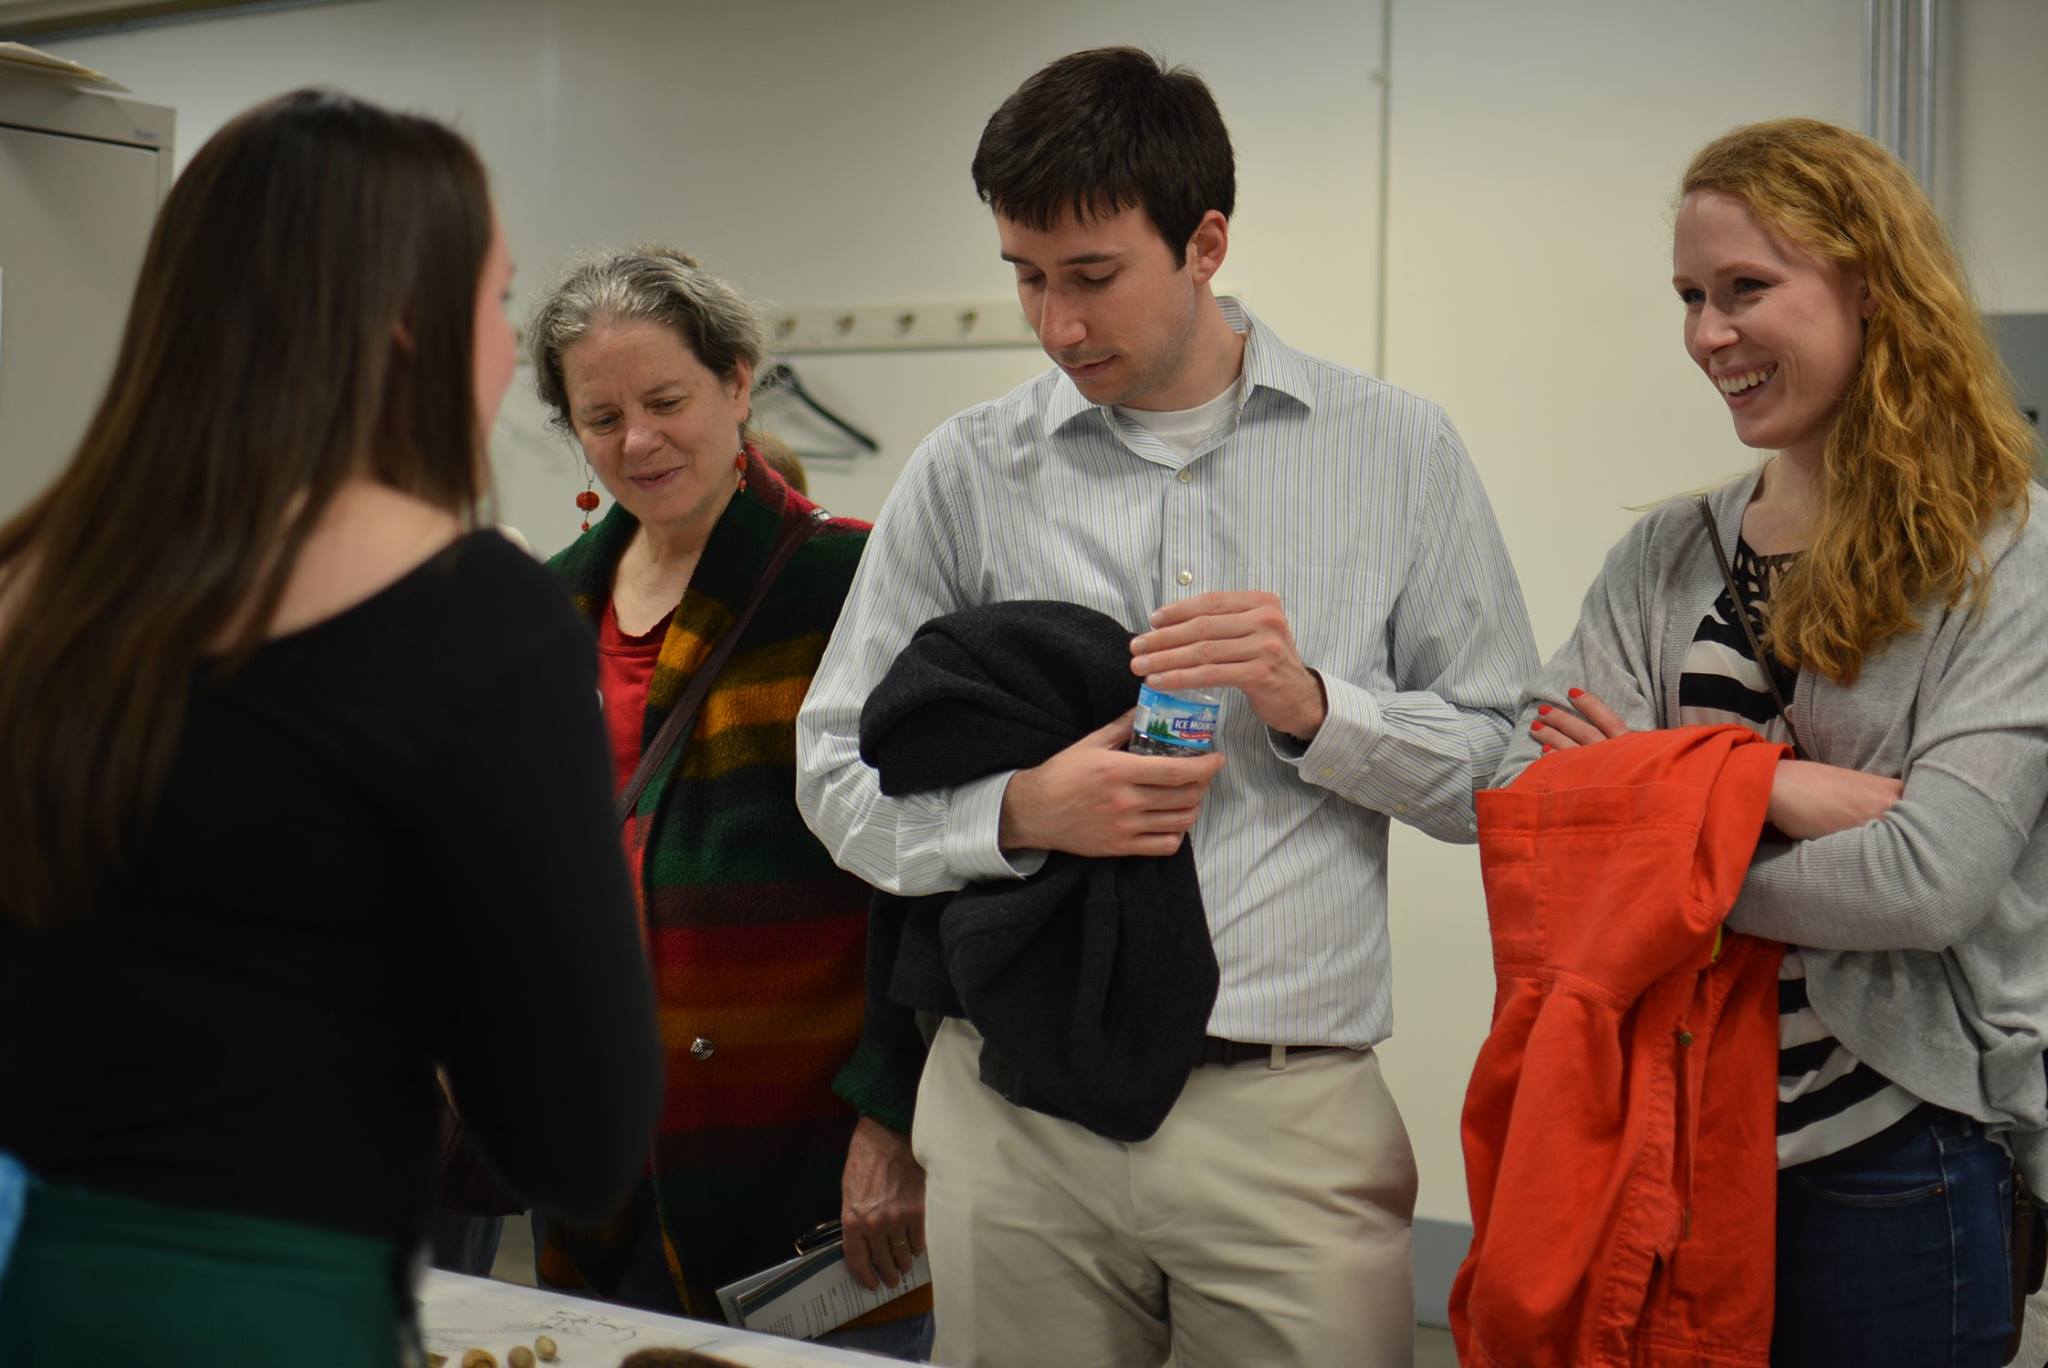 Liz presents to 3 guests about the artifacts on display. (c) Field Museum of Natural History - CC BY-NC 4.0